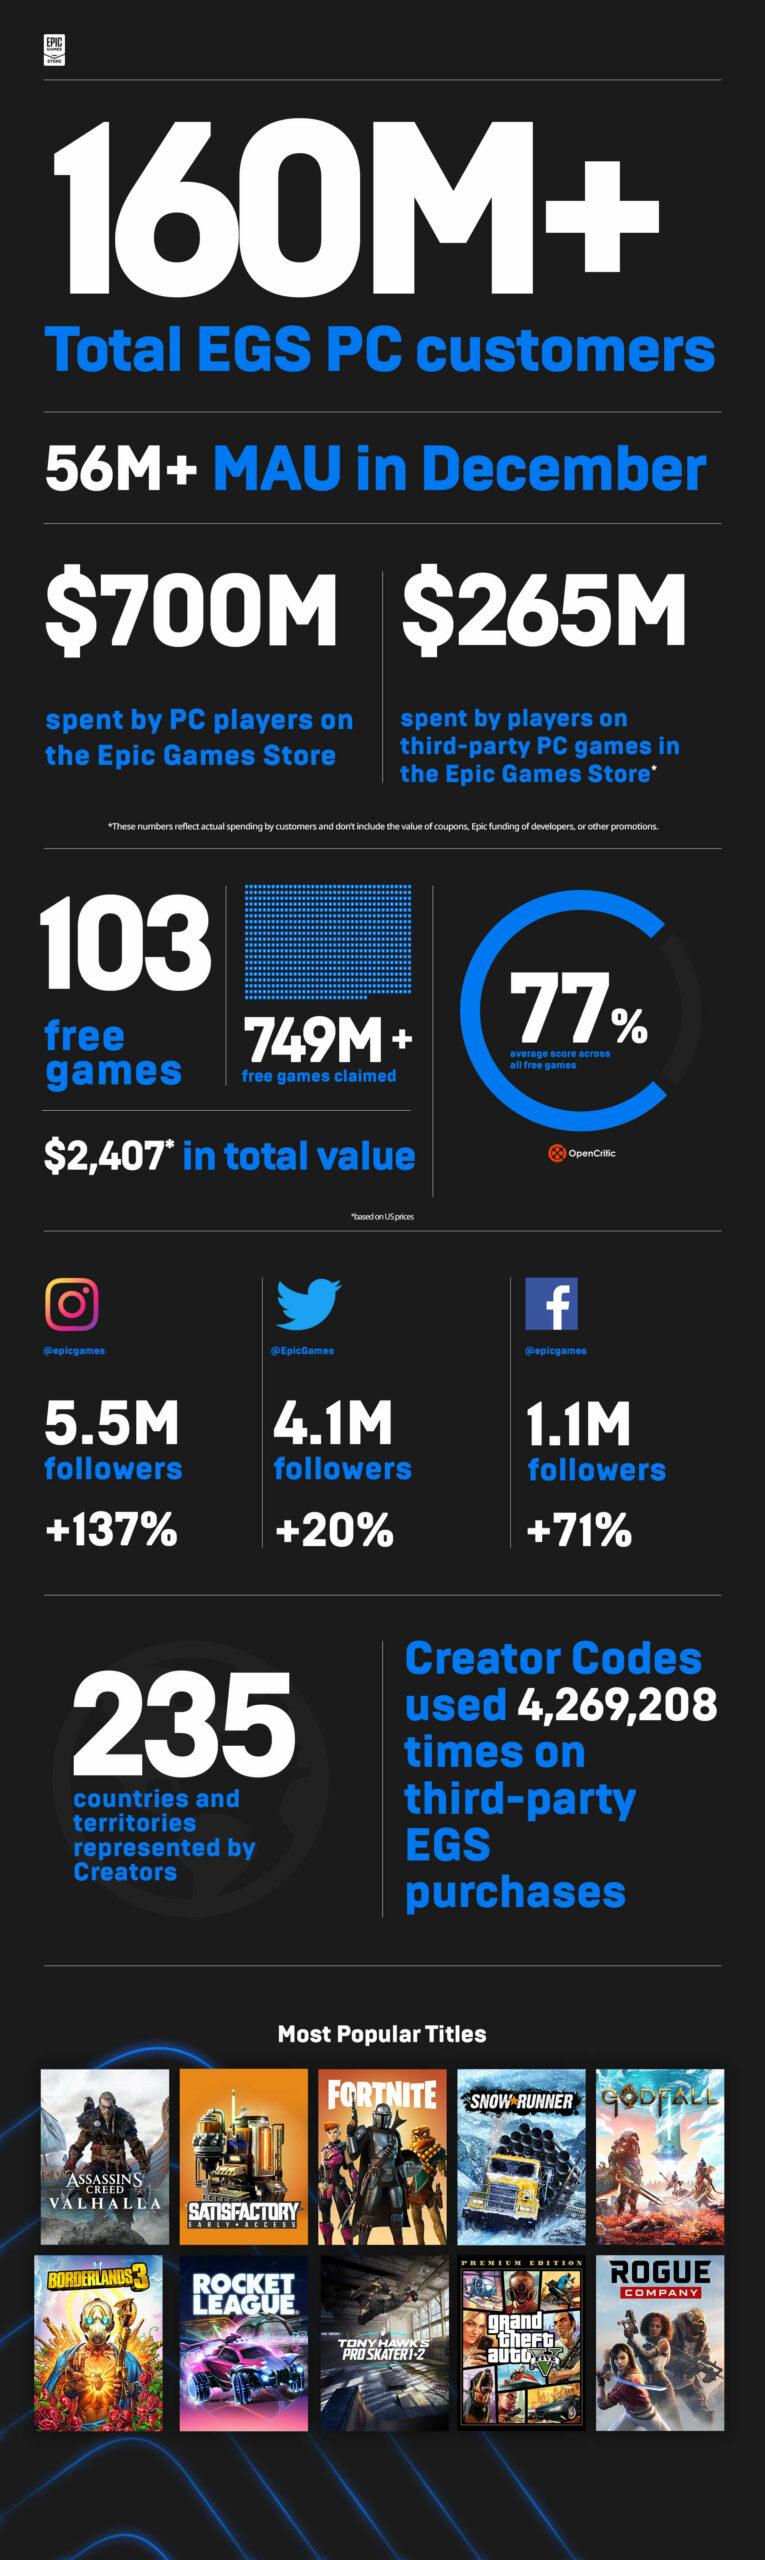 Epic Games Store Year In Review 2020 1920x6426 C965be855073